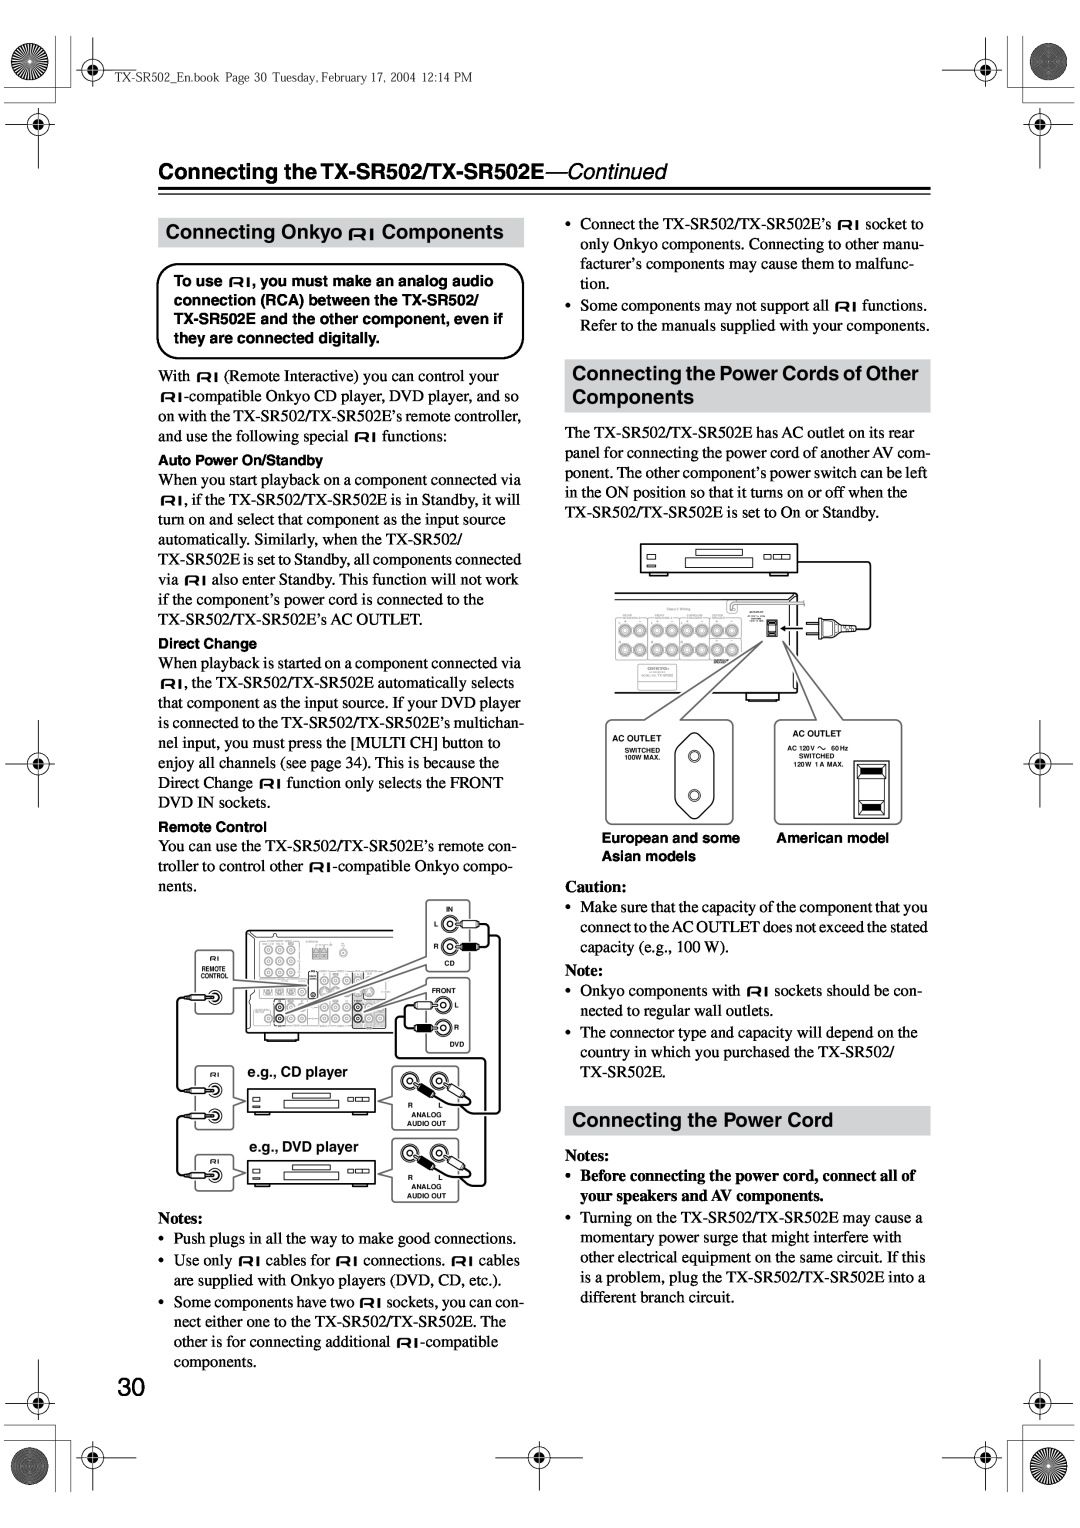 Onkyo TX-SR502E instruction manual Connecting Onkyo Components, Connecting the Power Cords of Other Components 